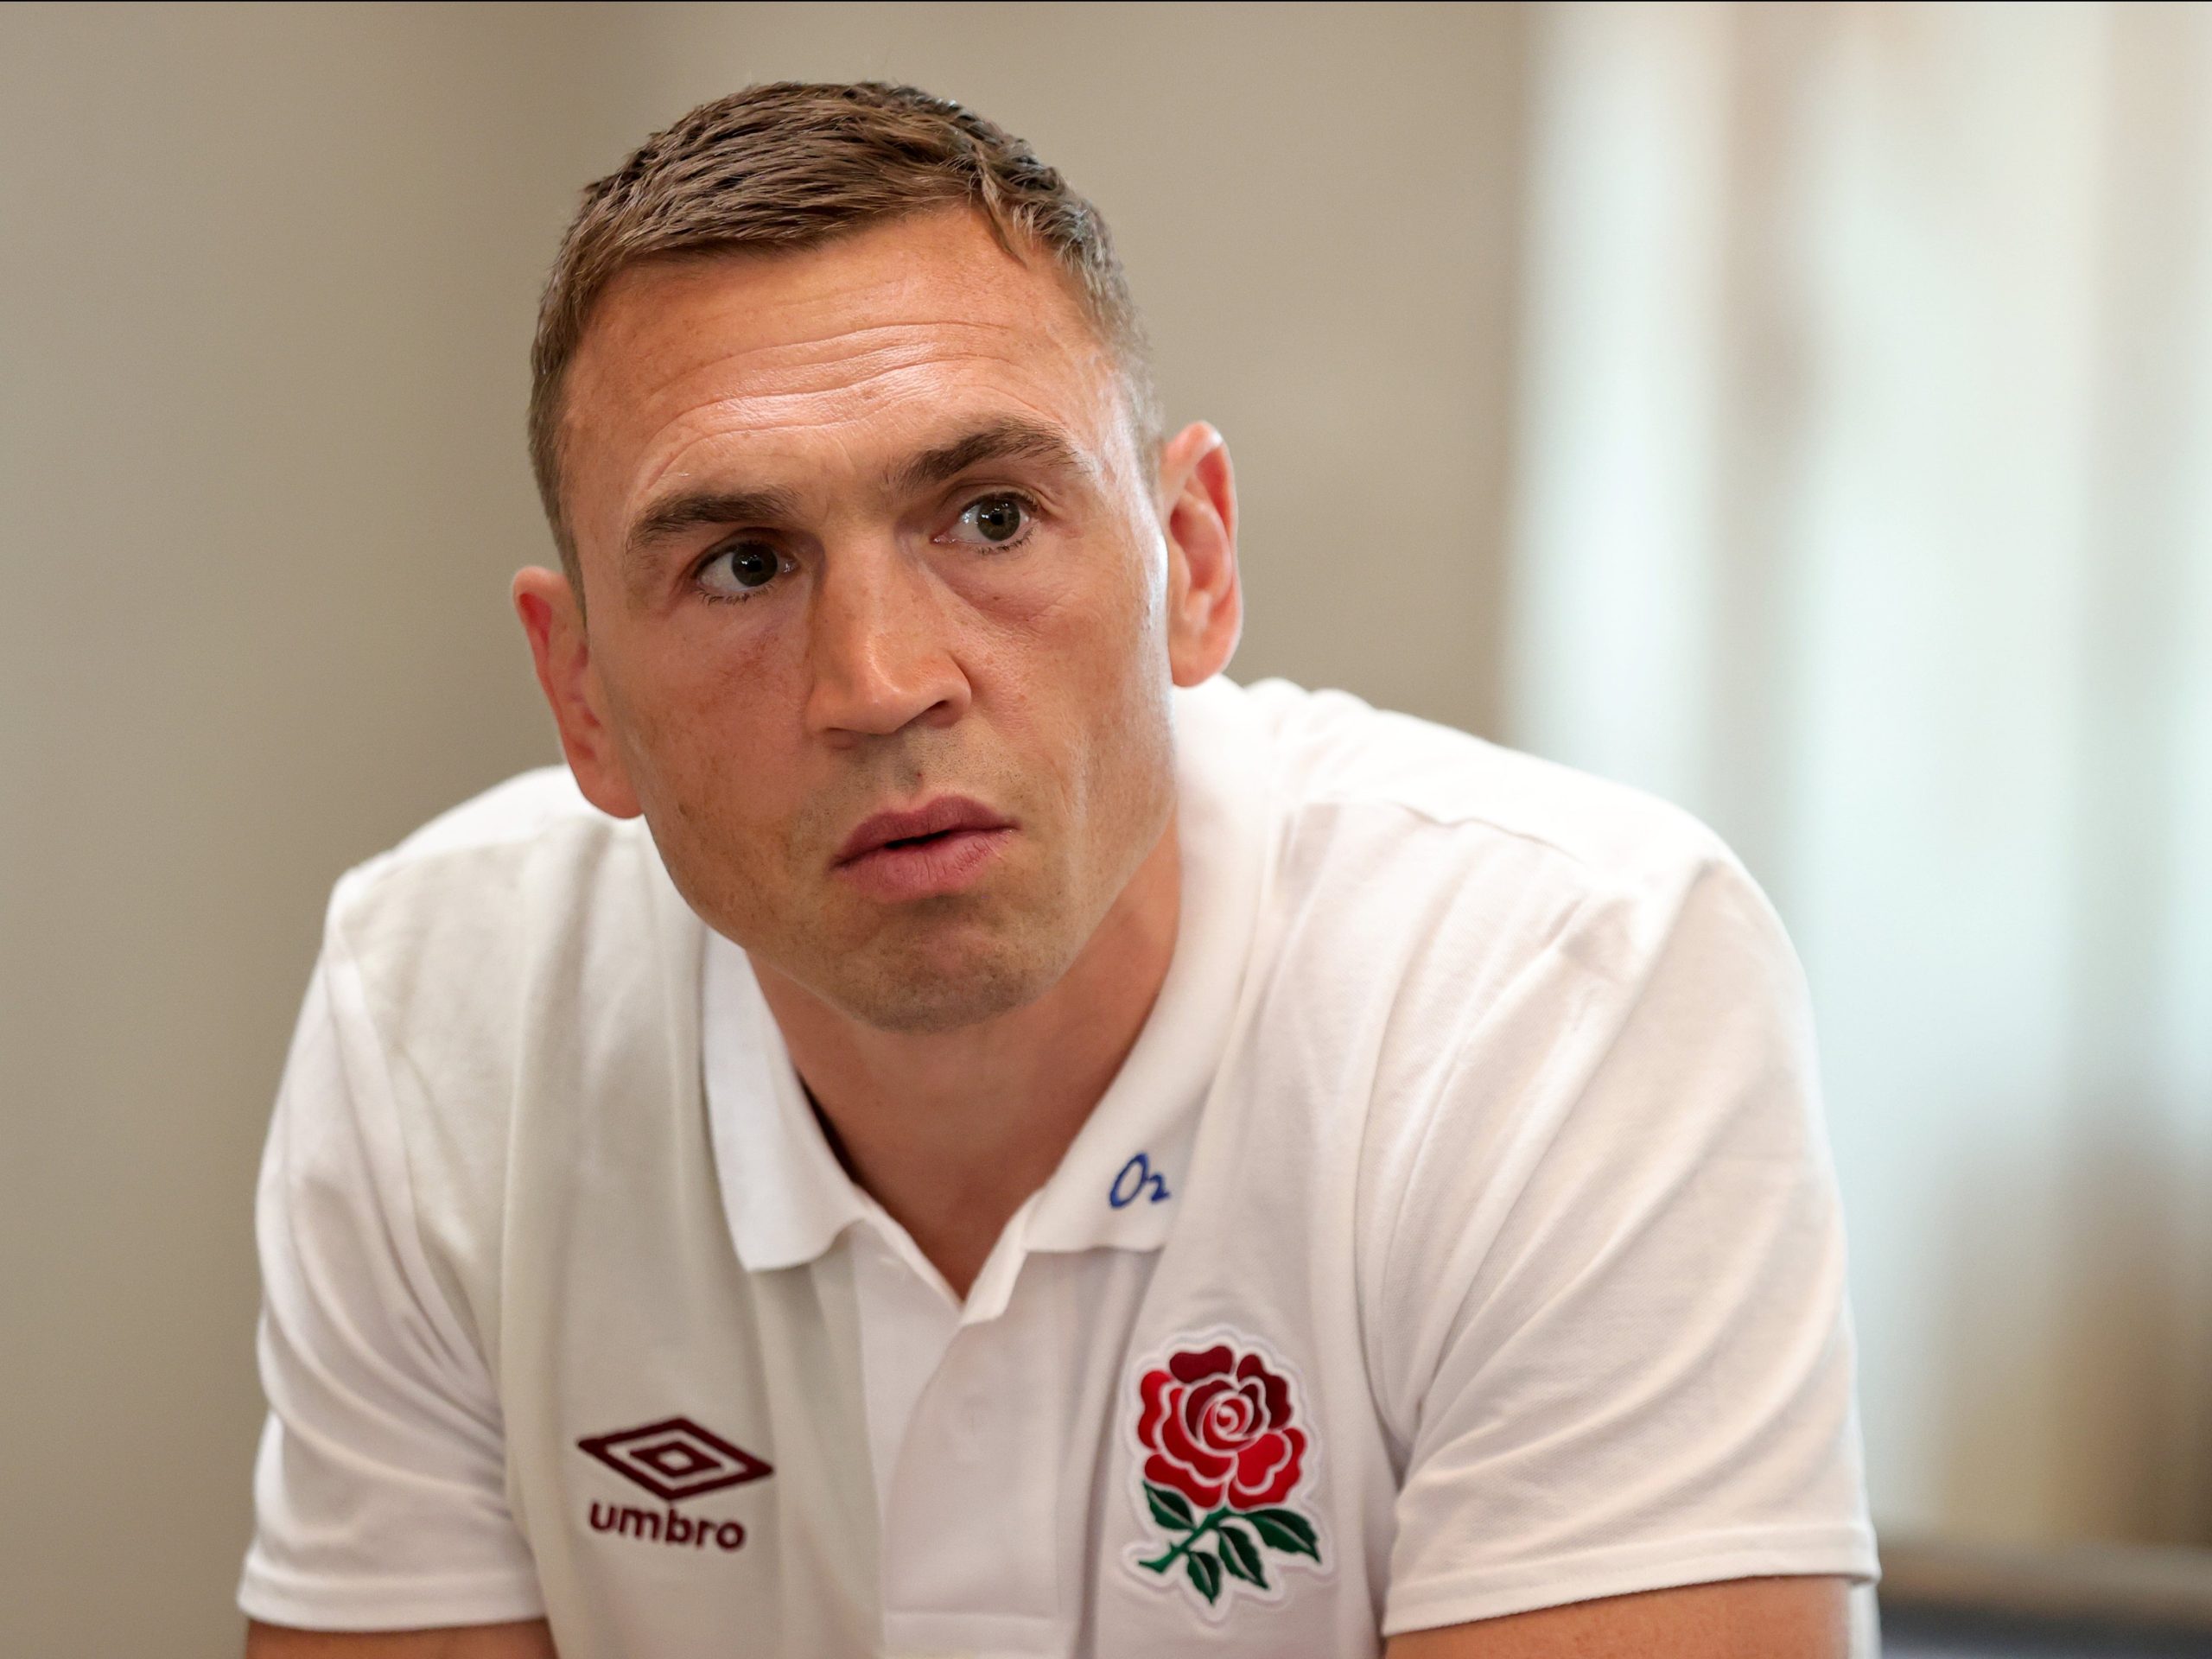 Defense Coach Sinfield also Comments on the Match against Samoa